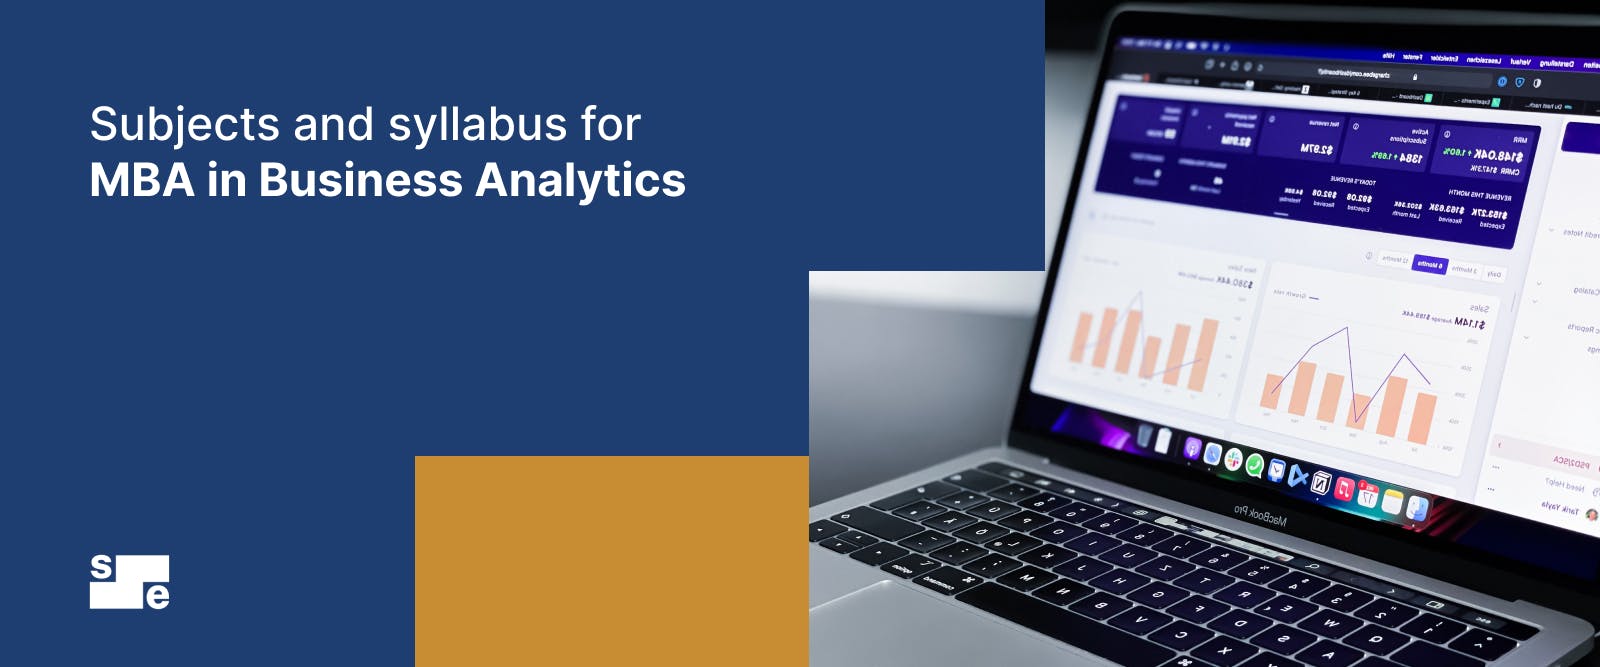 mba in business analytics